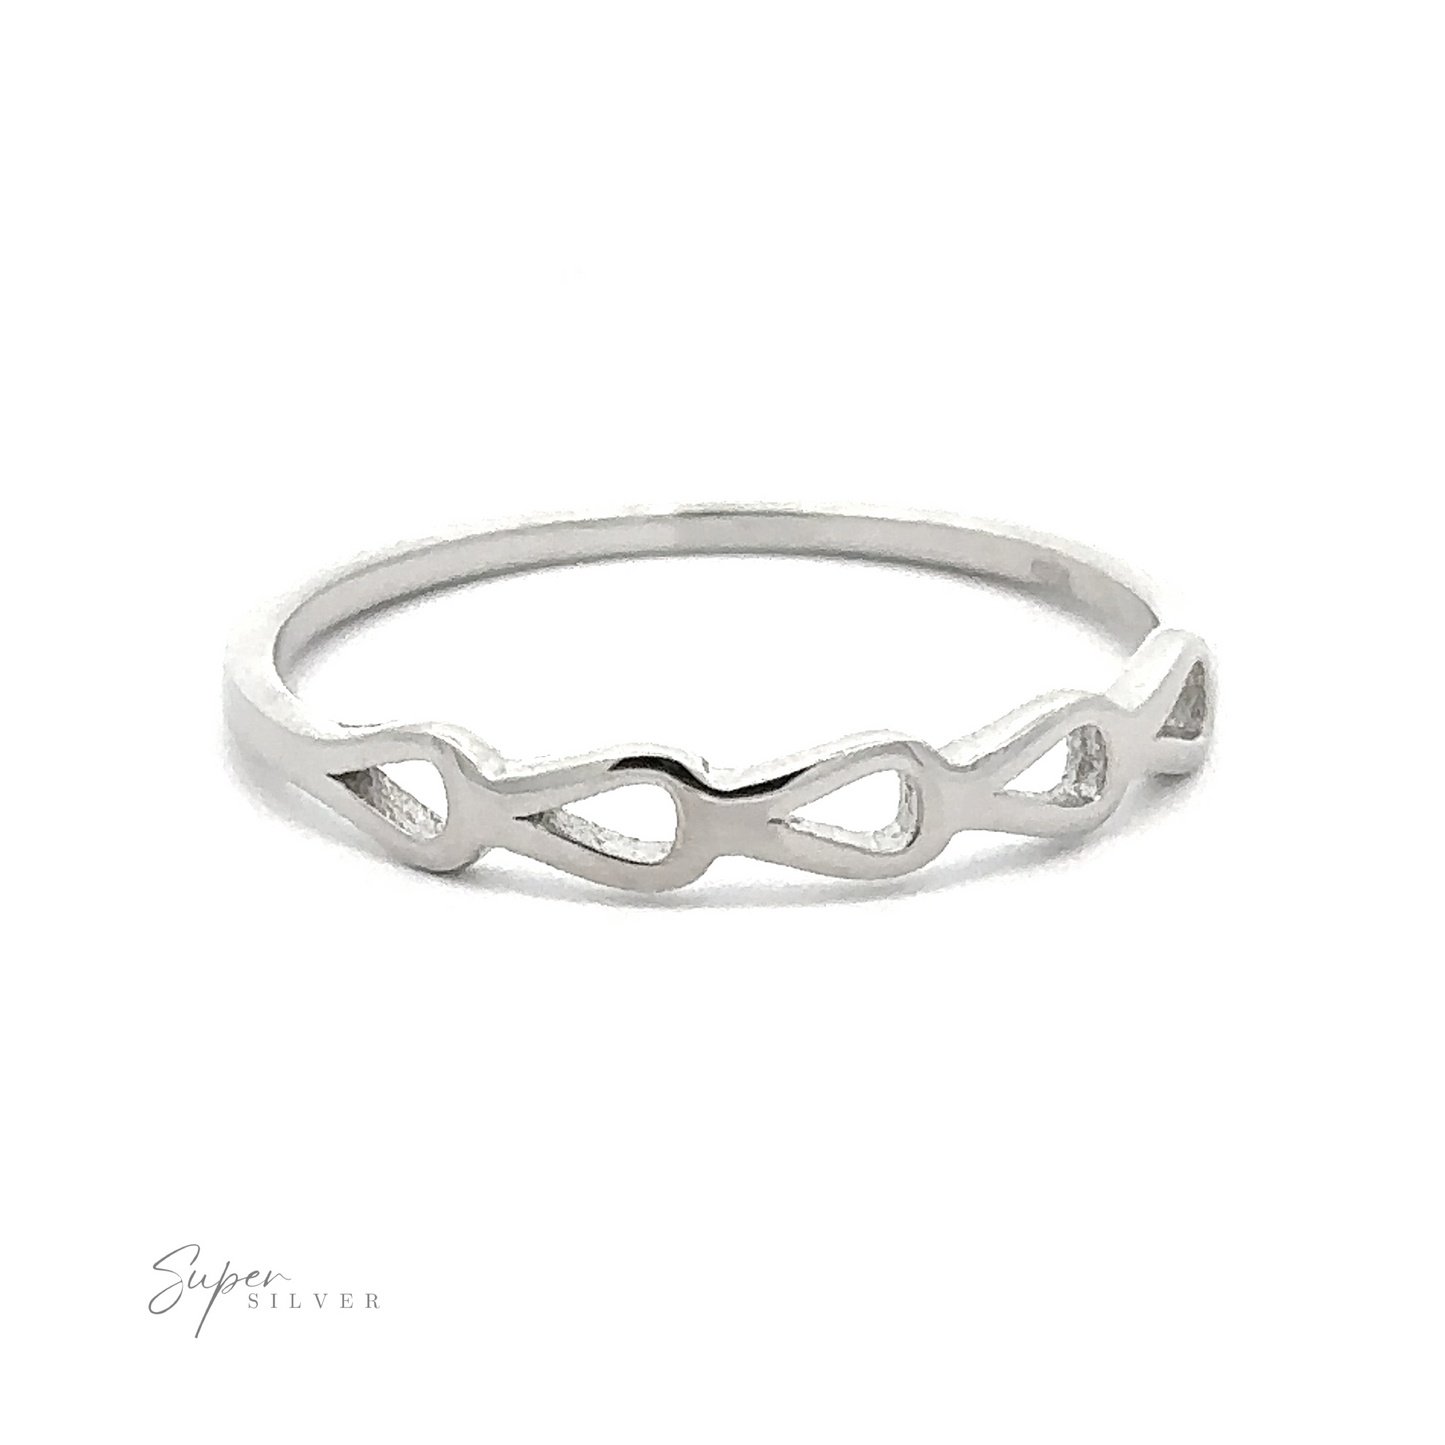 A rhodium-plated silver Cutout Teardrop Ring with an infinity design.